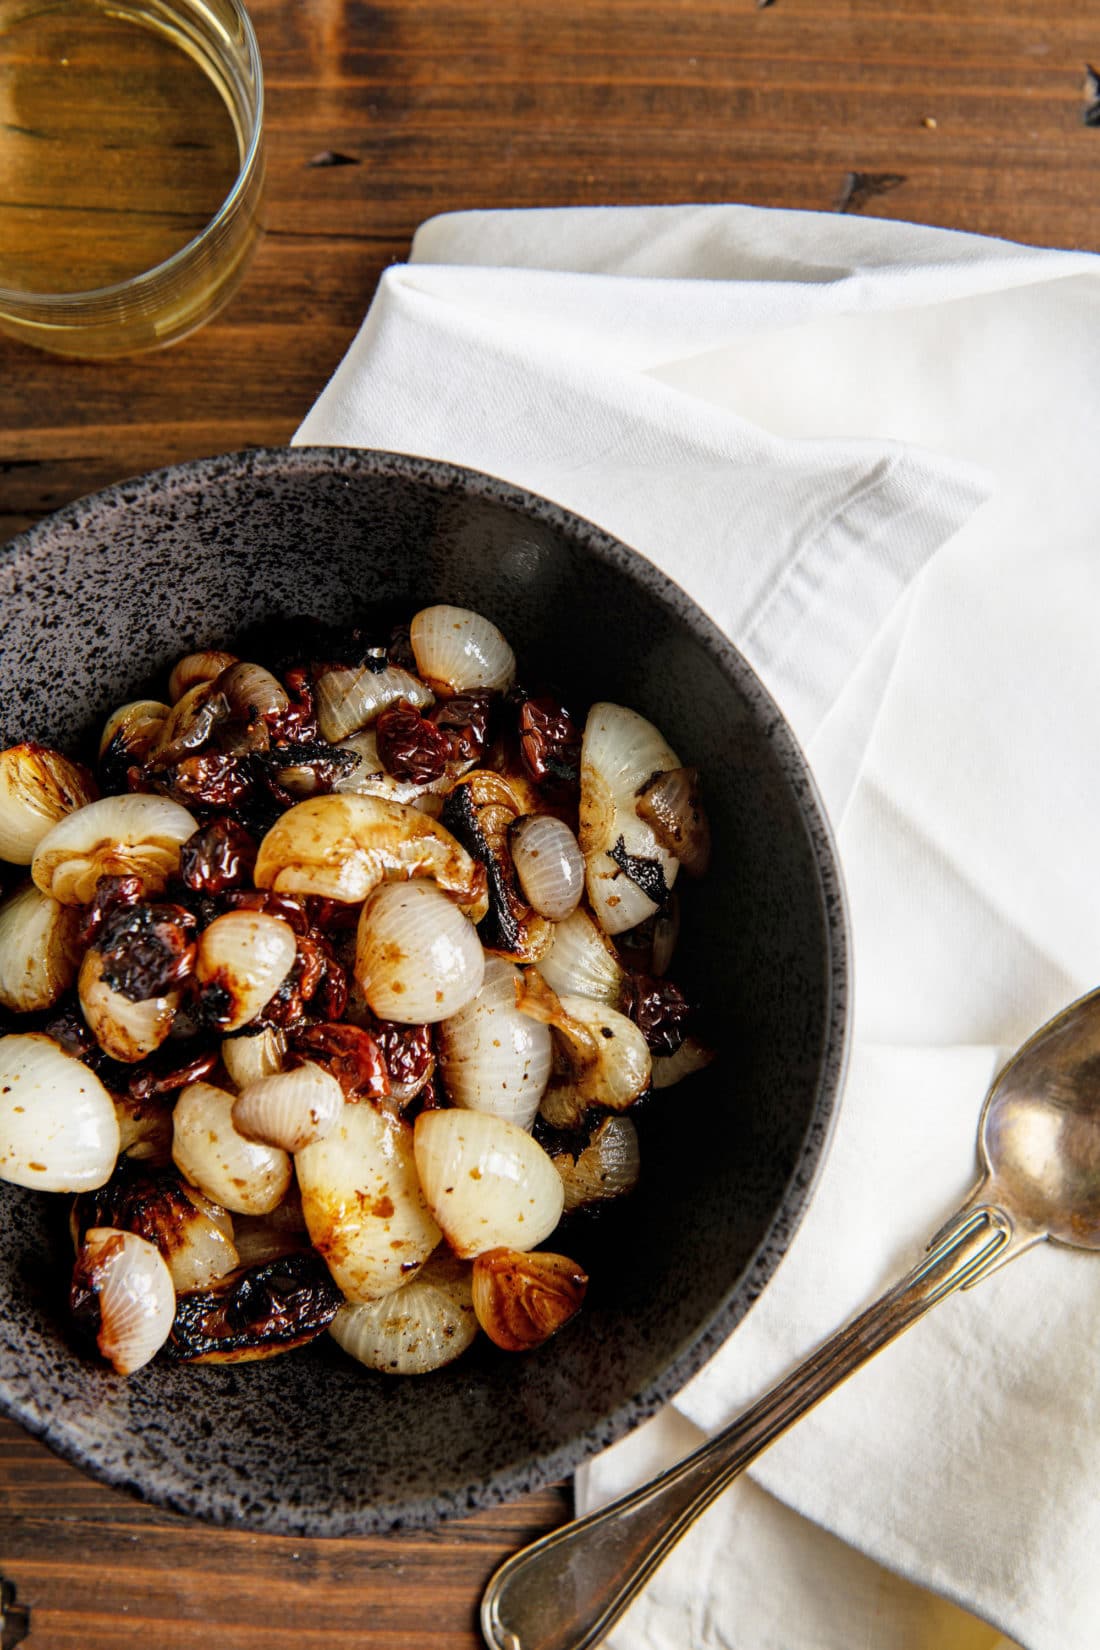 Braised Cipollini Onions with Dried Cherries